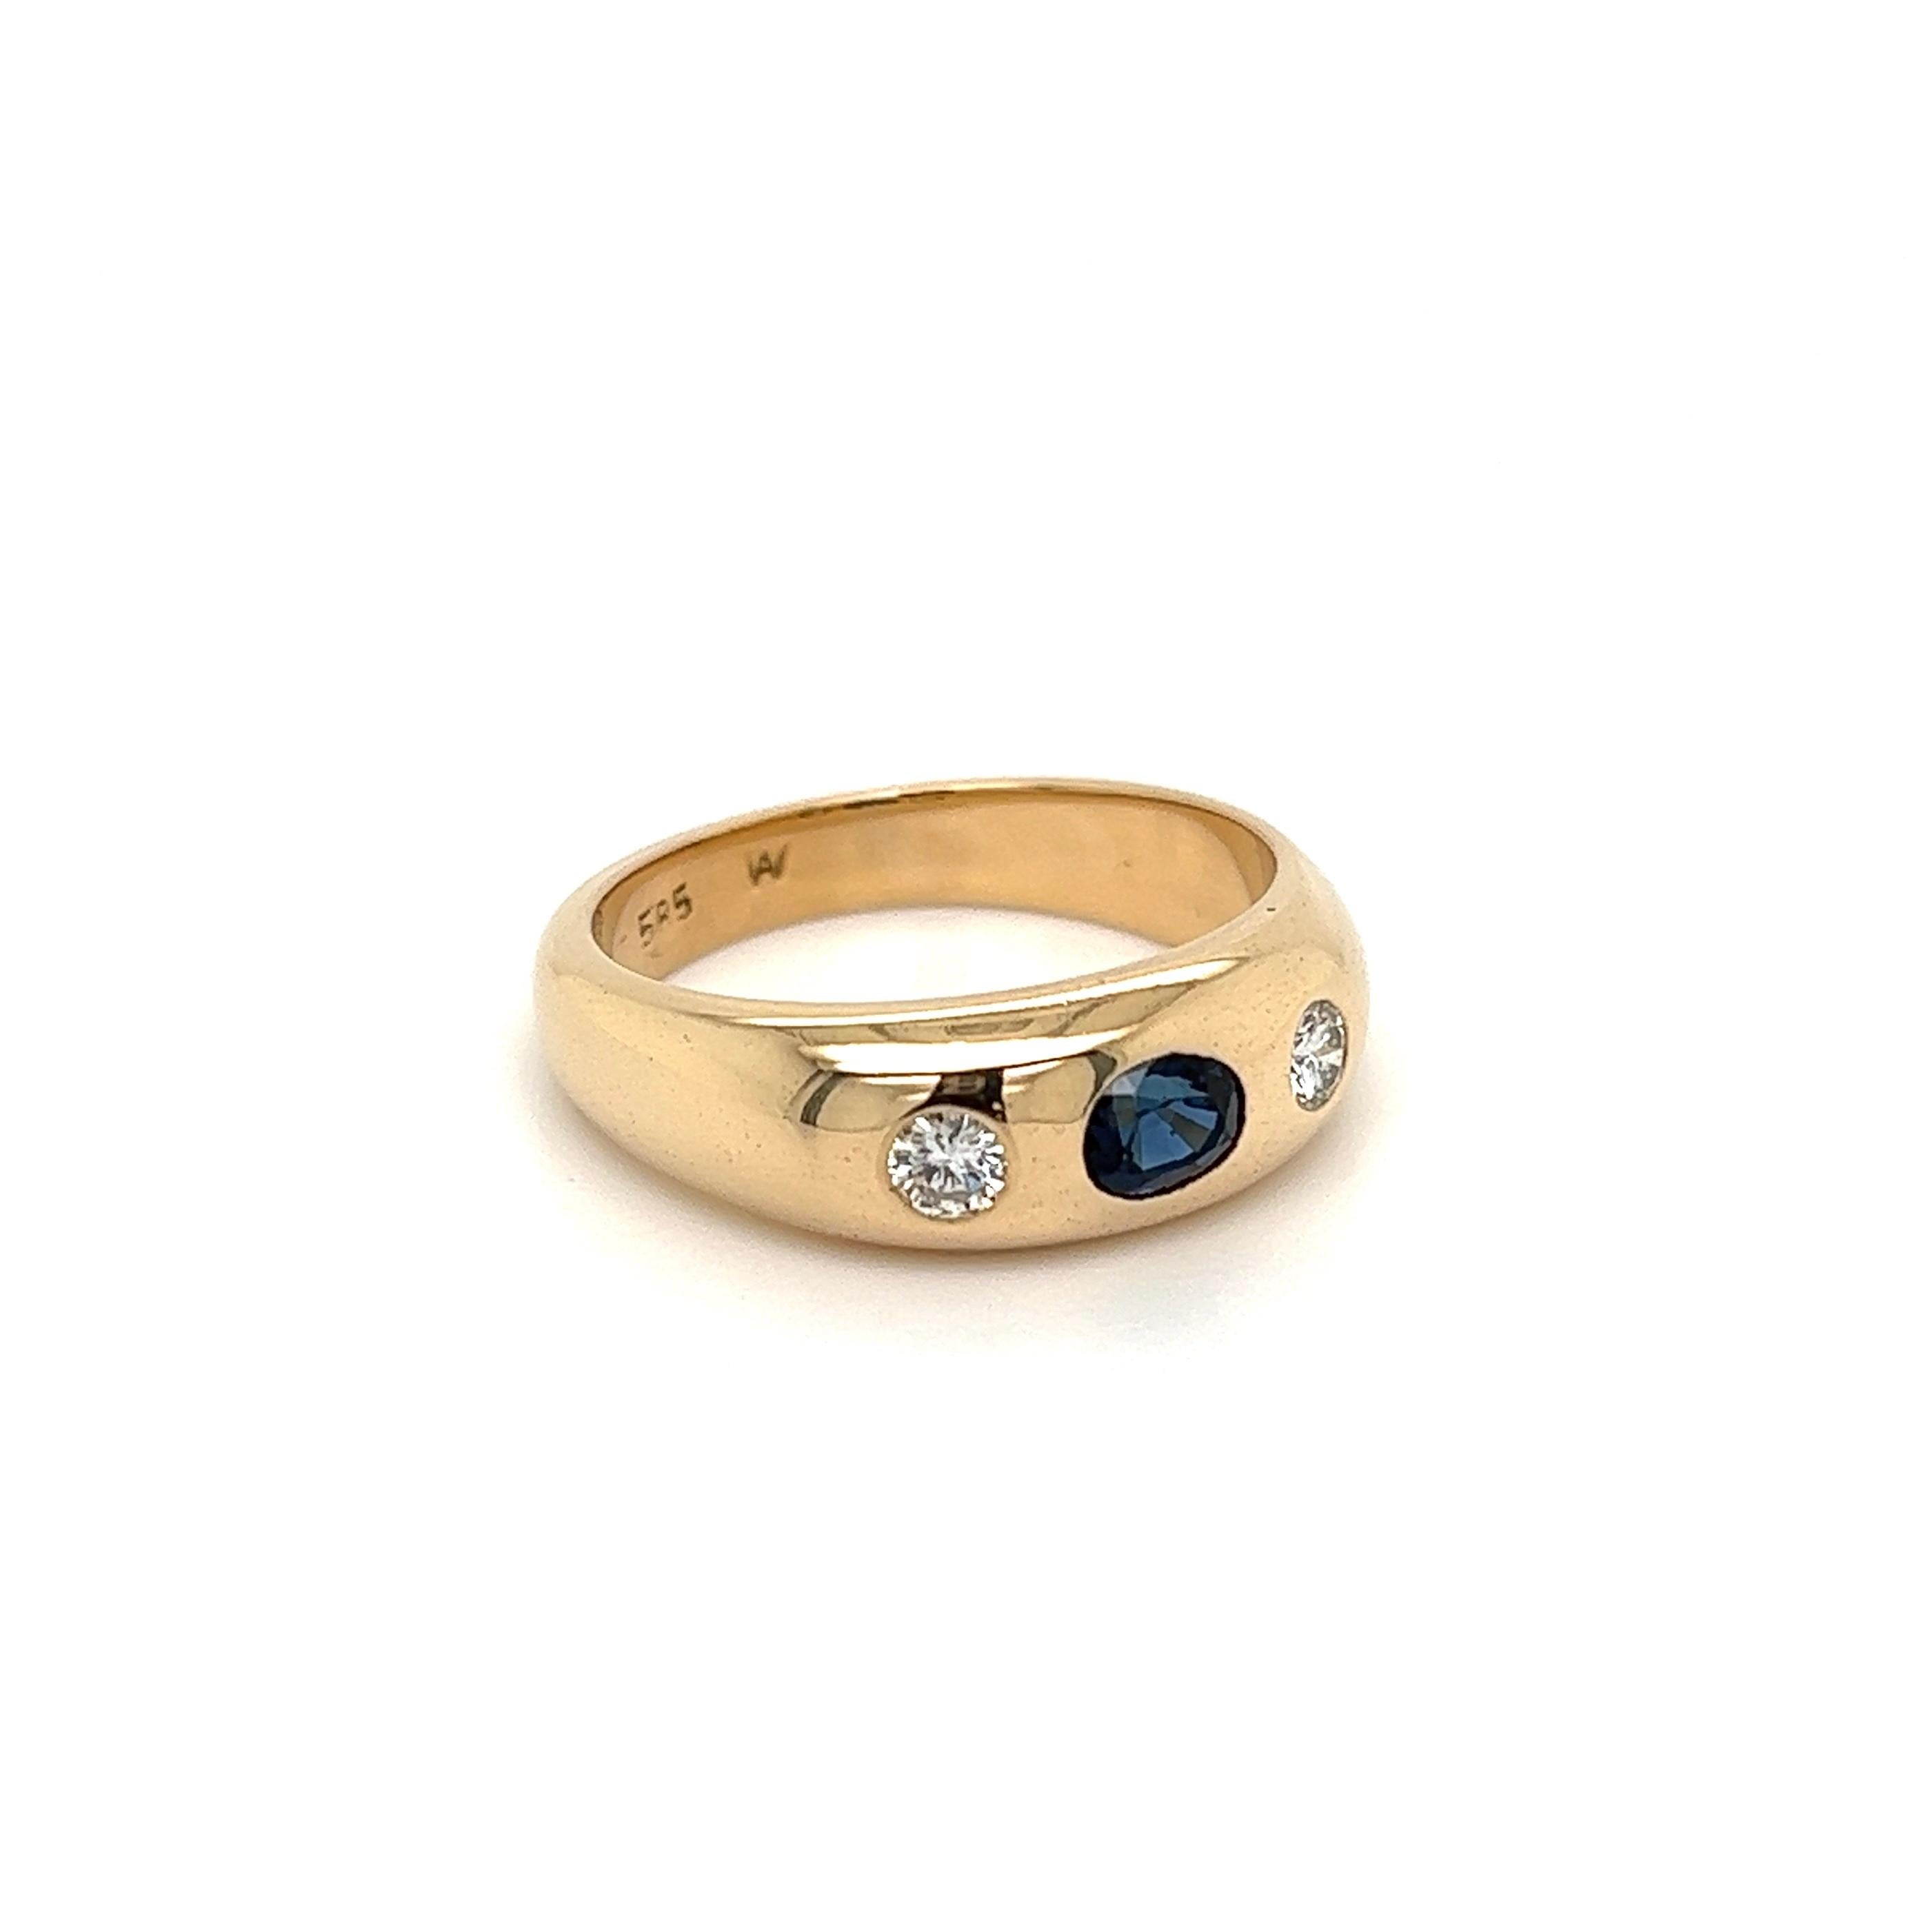 Handsome Gent’s Three-Stone Sapphire and Diamond Gold Ring, centering a securely Hand set Oval Sapphire, approx. 0.45 Carat, flanked by Diamonds, approx. 0.25tcw. Hand crafted 14K Yellow Gold mounting. Measuring approx. 0.98”L x 0.84”W x 0.26”H.